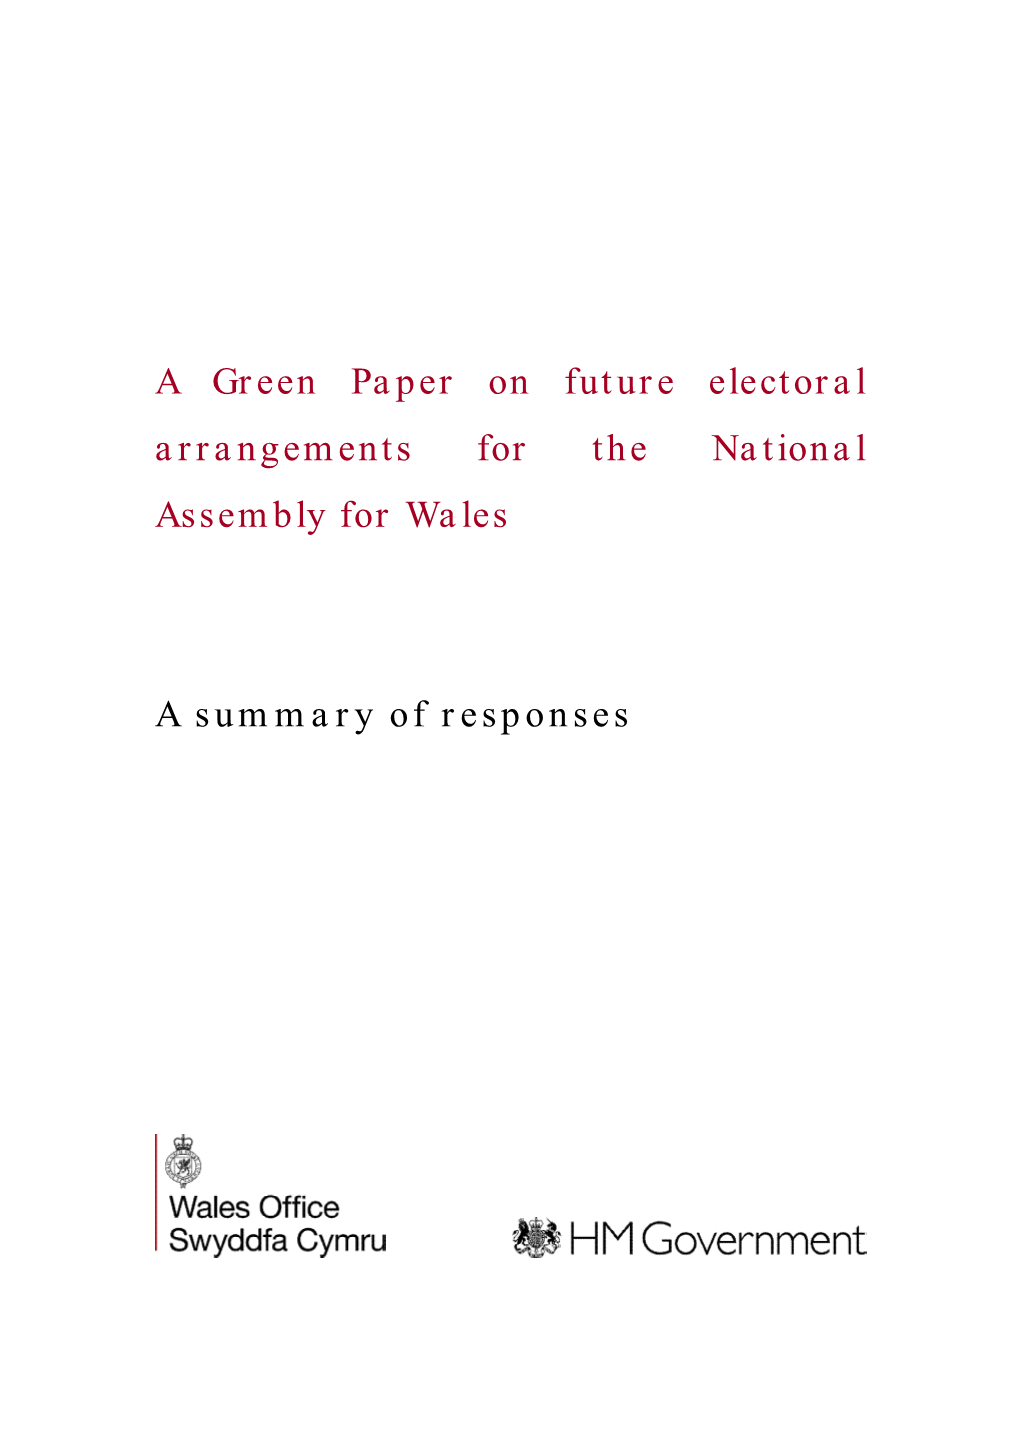 A Green Paper on Future Electoral Arrangements for the National Assembly for Wales a Summary of Responses